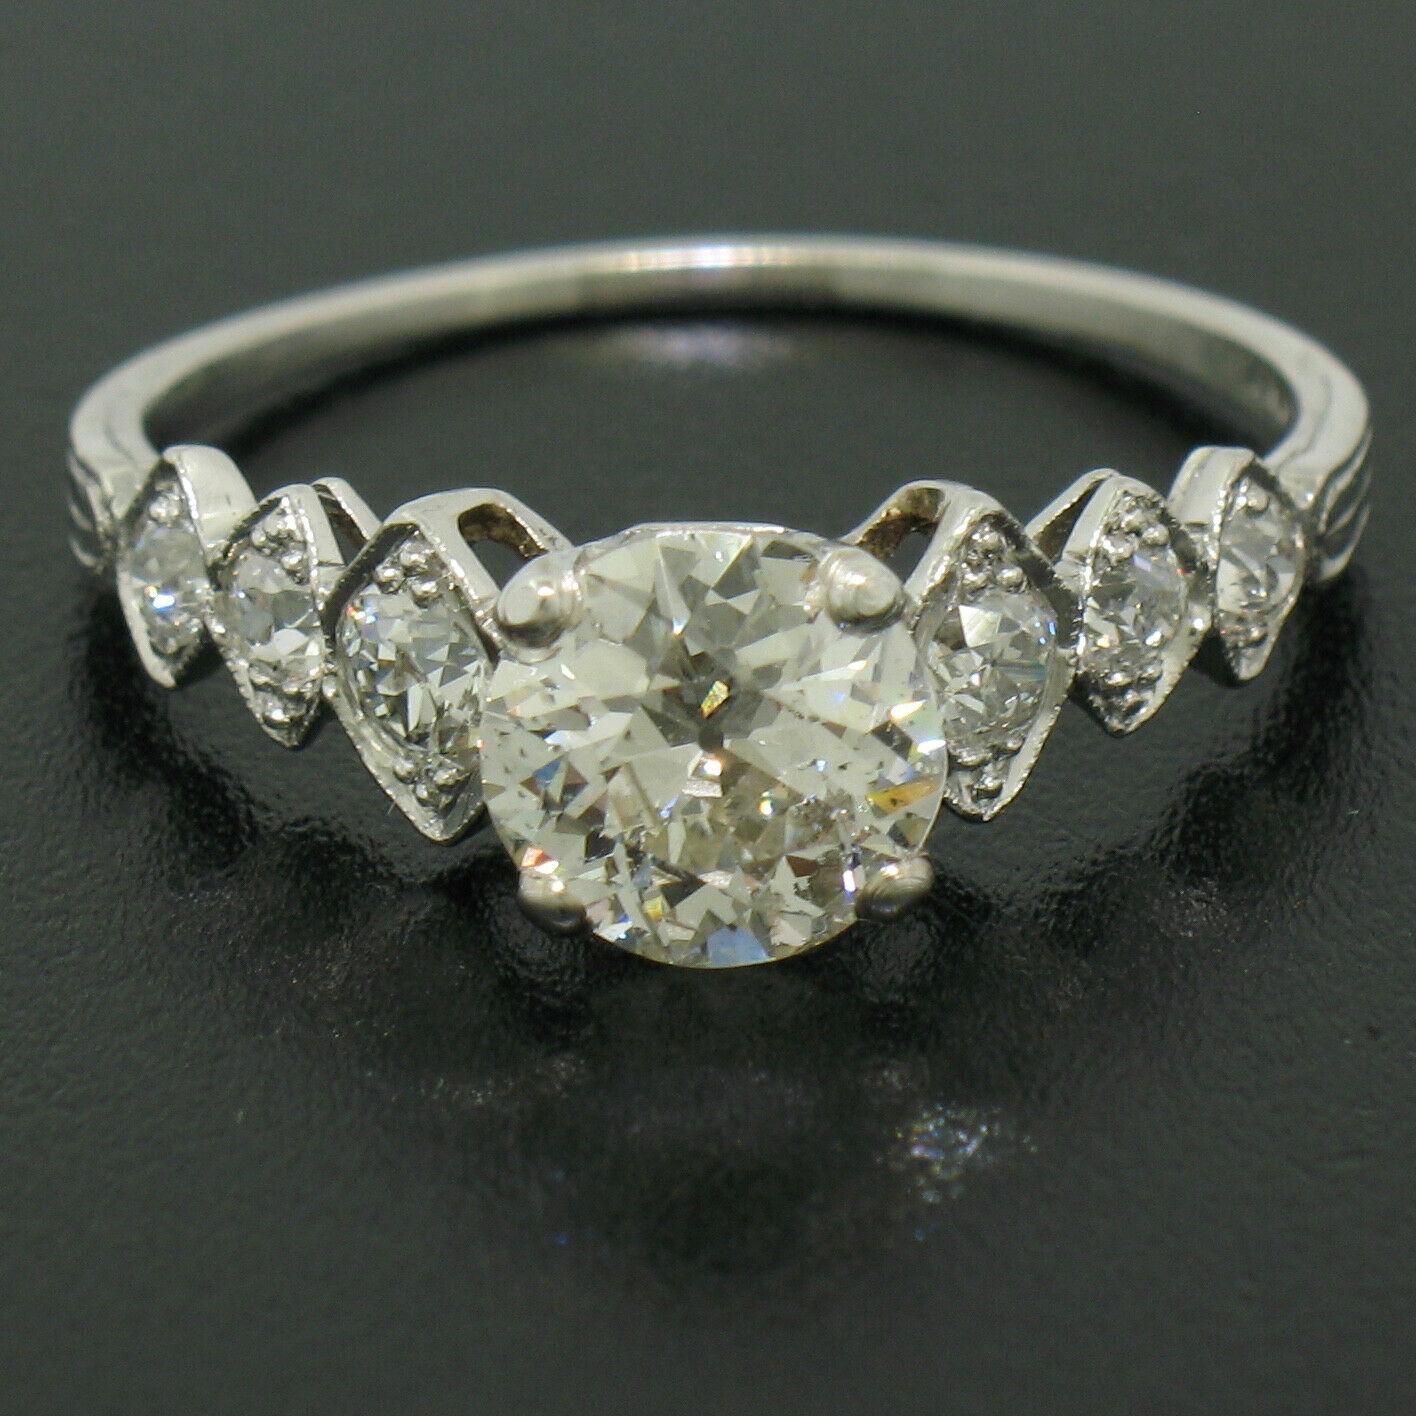 Here we have an ALL ORIGINAL antique ring crafted from solid 900 platinum during the art deco period. The ring features a fabulous center diamond weighing approximately 1.35 carats. The stone is perfectly old European cut and, as such, is very